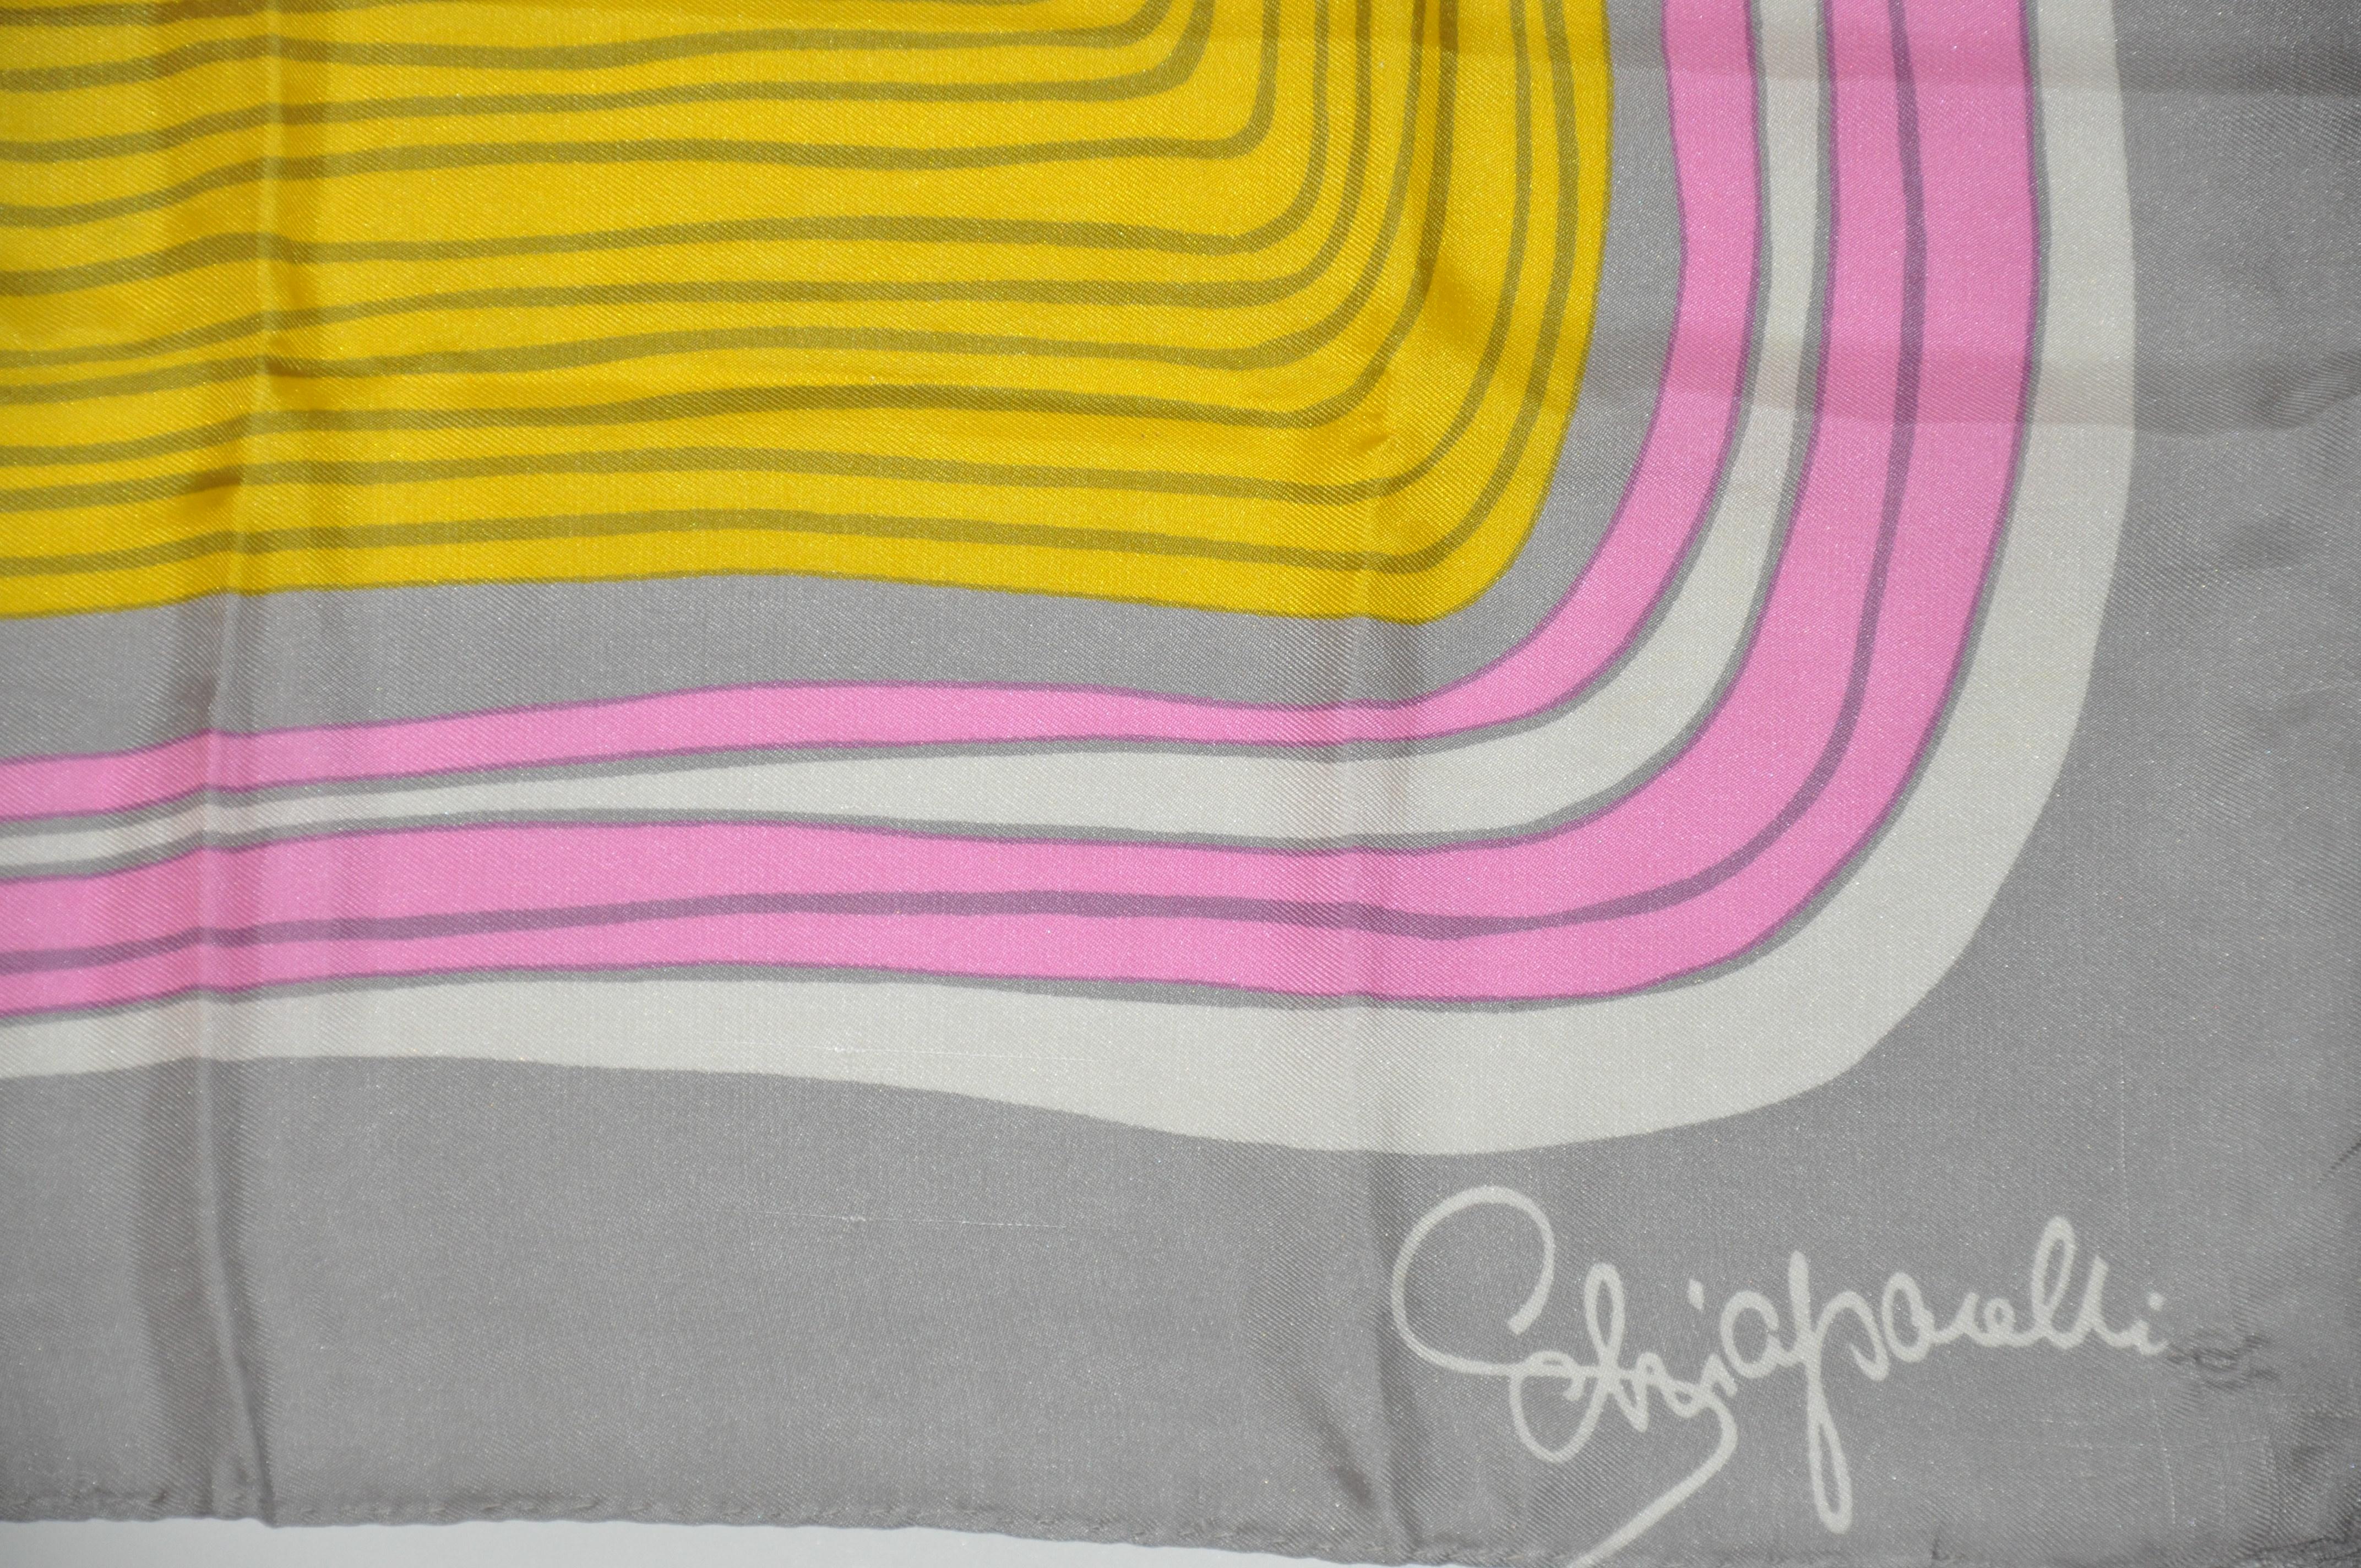      Schiaparelli's shades of pinks, yellows and ivory surrounded with steel-gray silk scarf measures 21 inches by 22 inches. Hand-rolled edges and made in Italy.